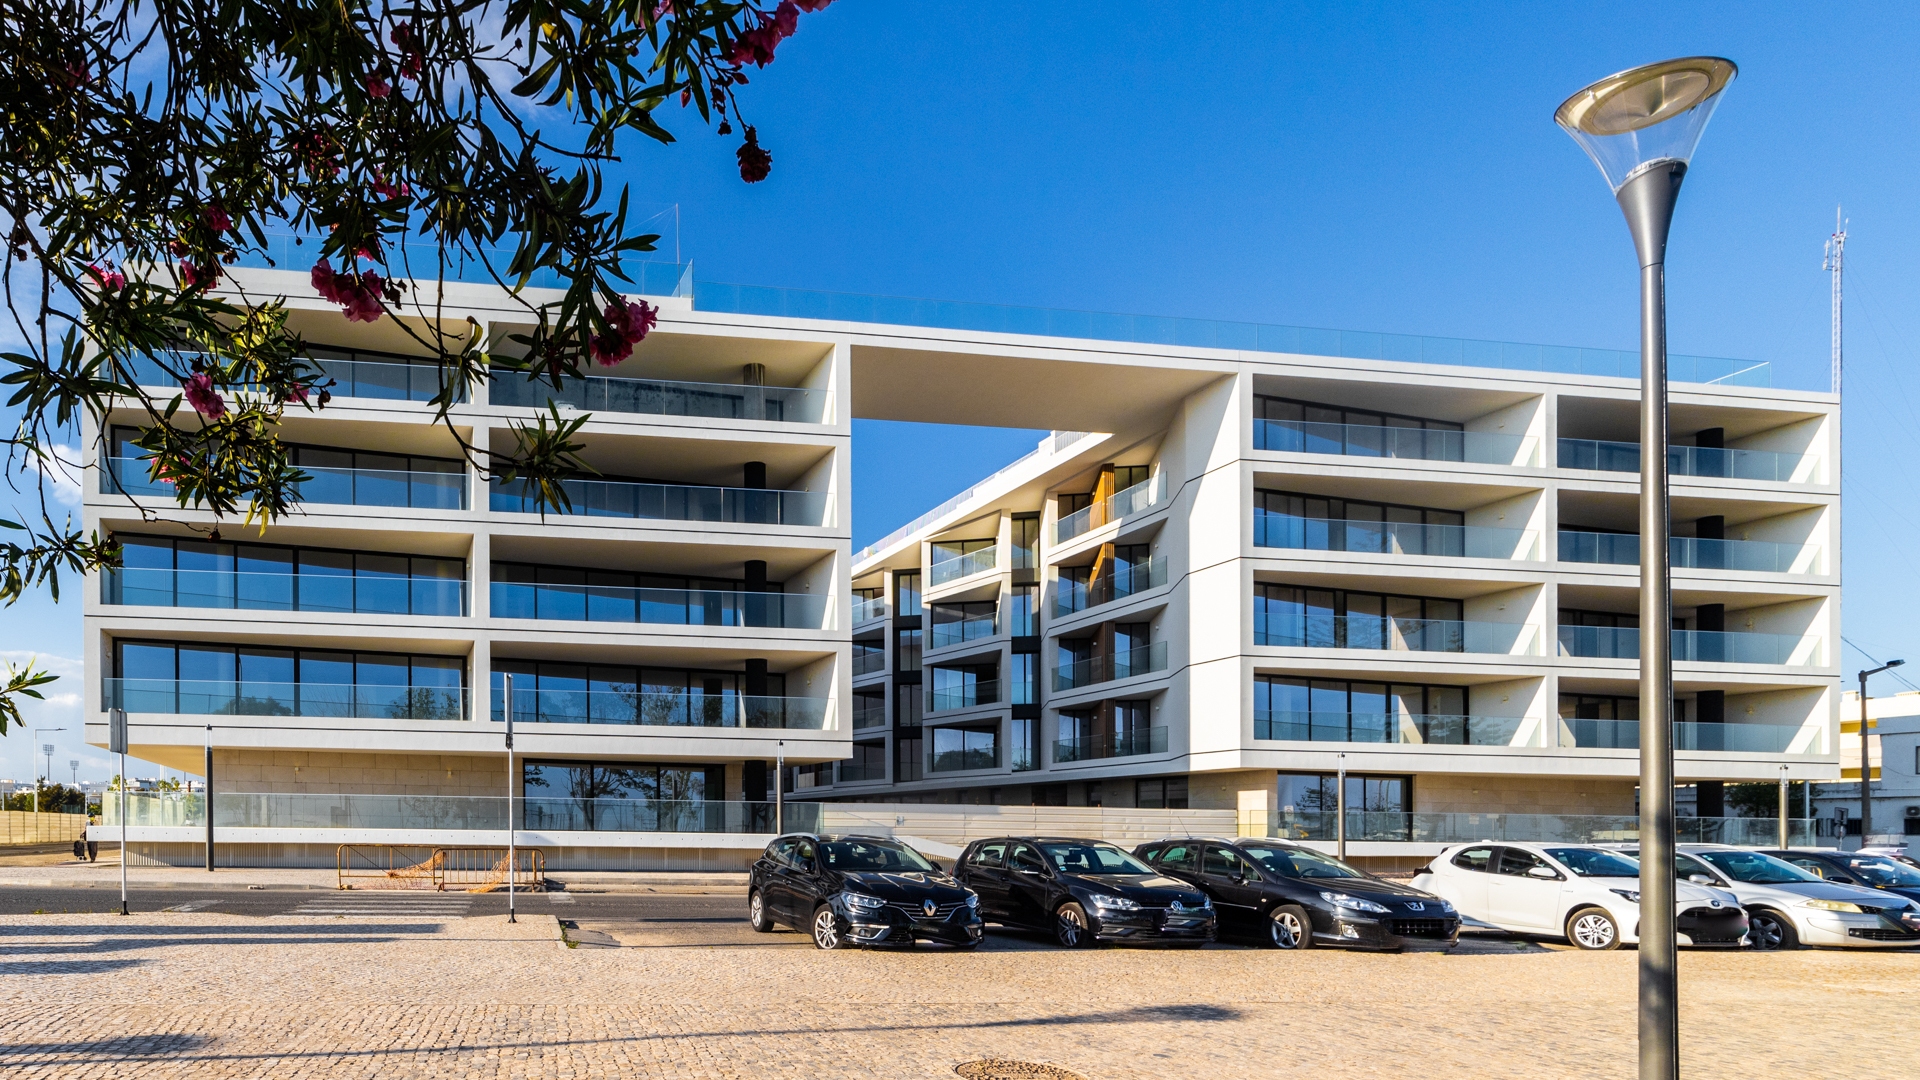 Frontline, 2-Bedroom Apartments with Stunning Sea-View in Closed Condominium, Olhão, East Algarve | TV1834 These luxury apartments in an enviable location opposite Olhão Marina have spectacular views of the Ria Formosa, the islands and the sea.